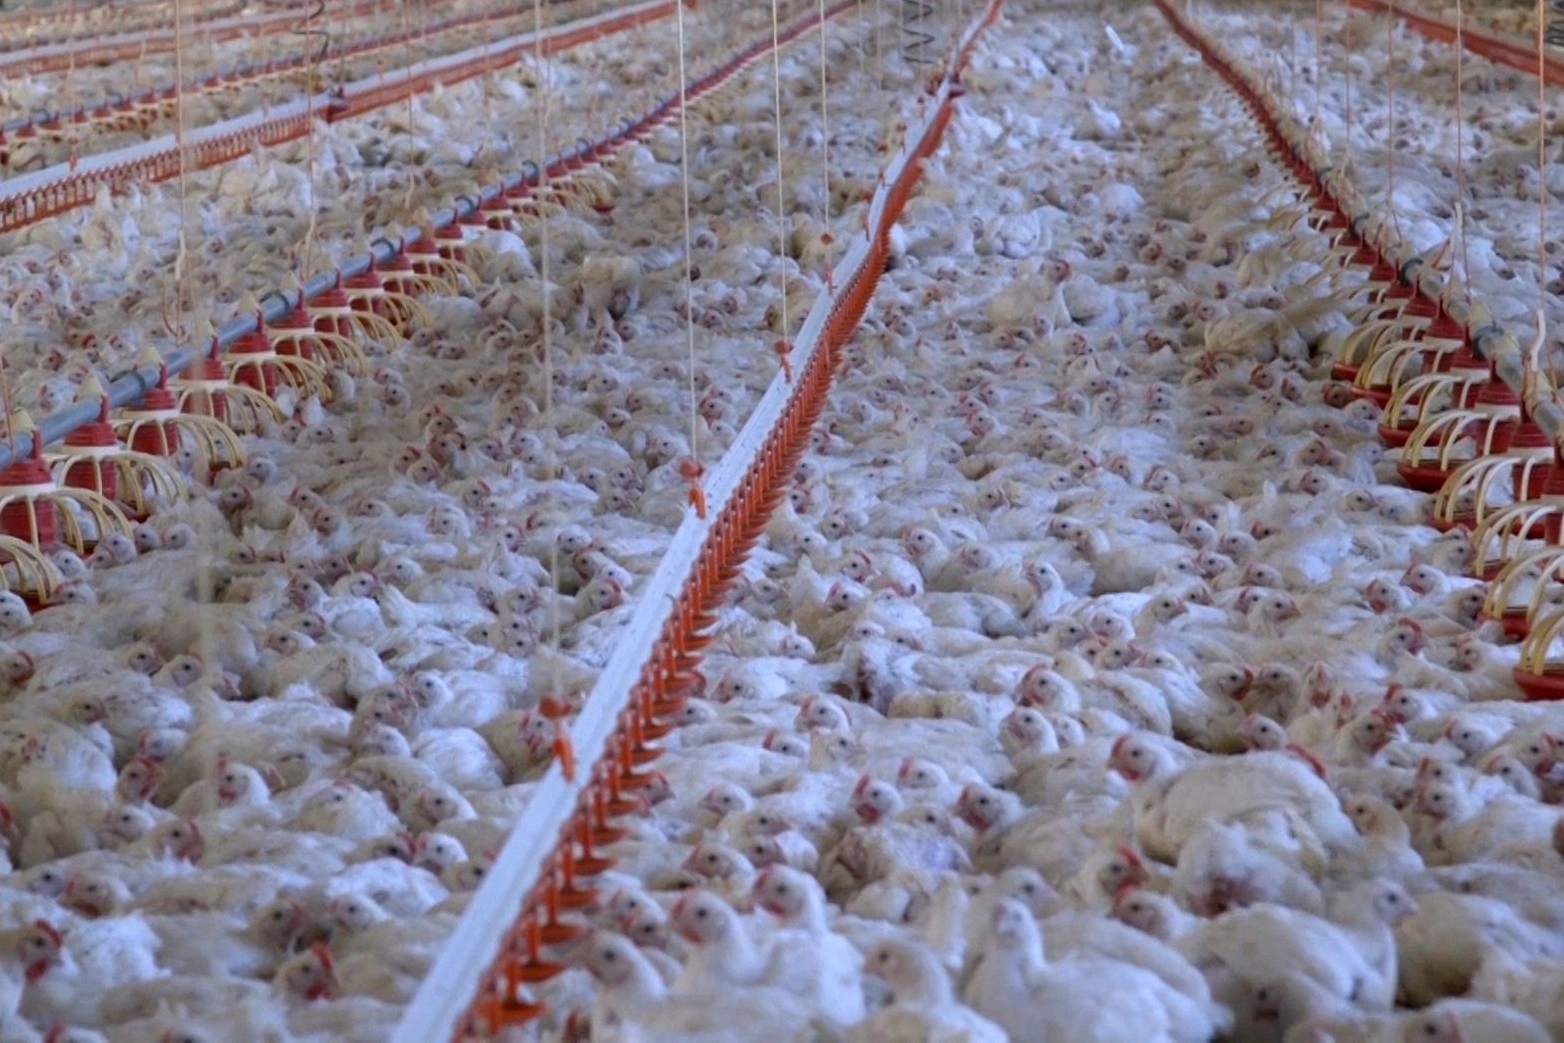 Pictured: 32 day old broiler chickens in a commercial indoor system